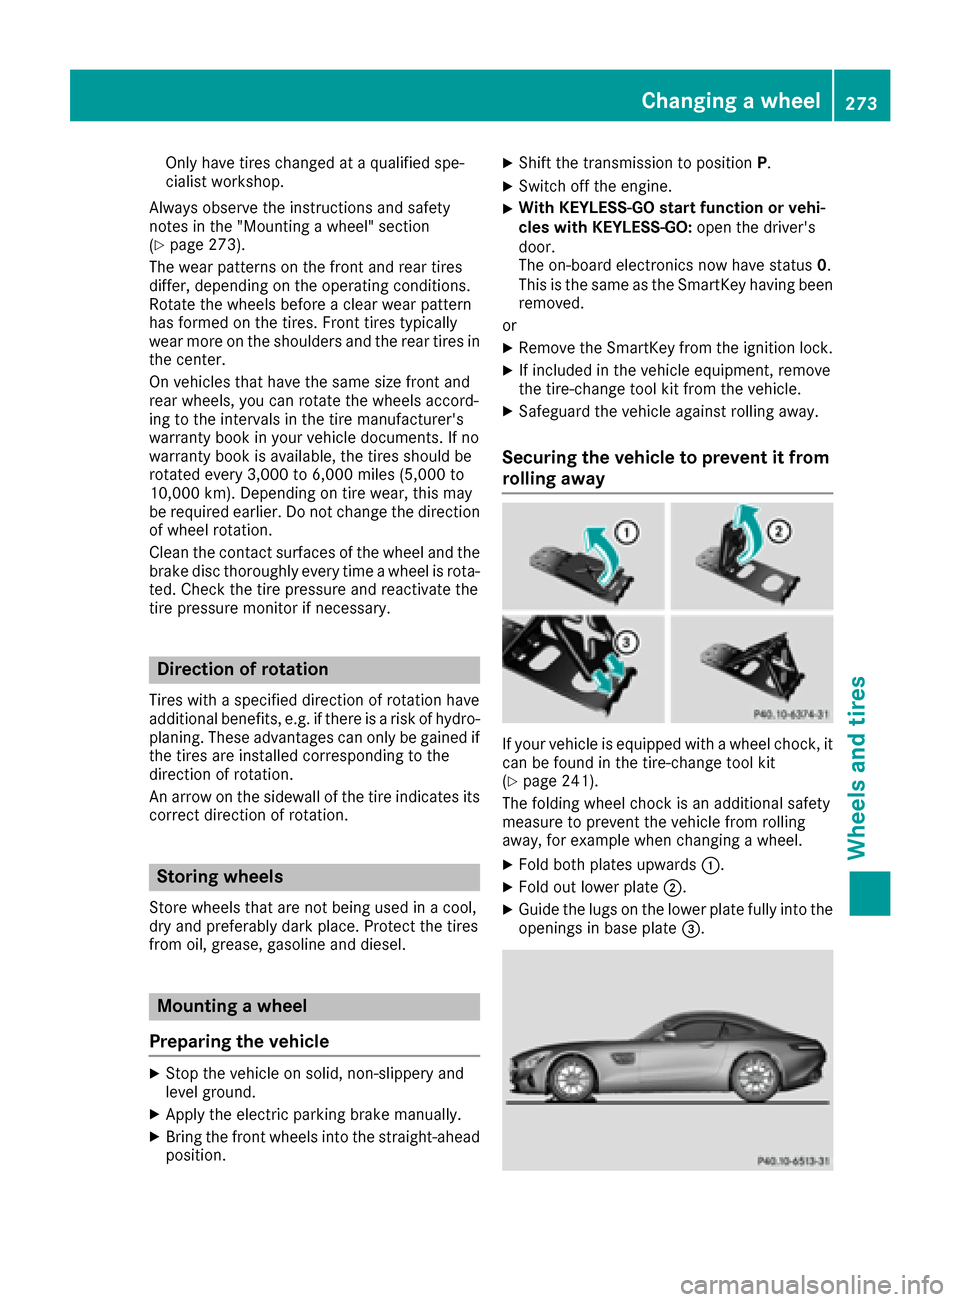 MERCEDES-BENZ AMG GT S 2017 C190 Owners Manual Only have tires changed at a qualified spe-
cialist workshop.
Always observe the instructions and safety
notes in the "Mounting a wheel" section
(
Ypage 273).
The wear patterns on the front and rear t